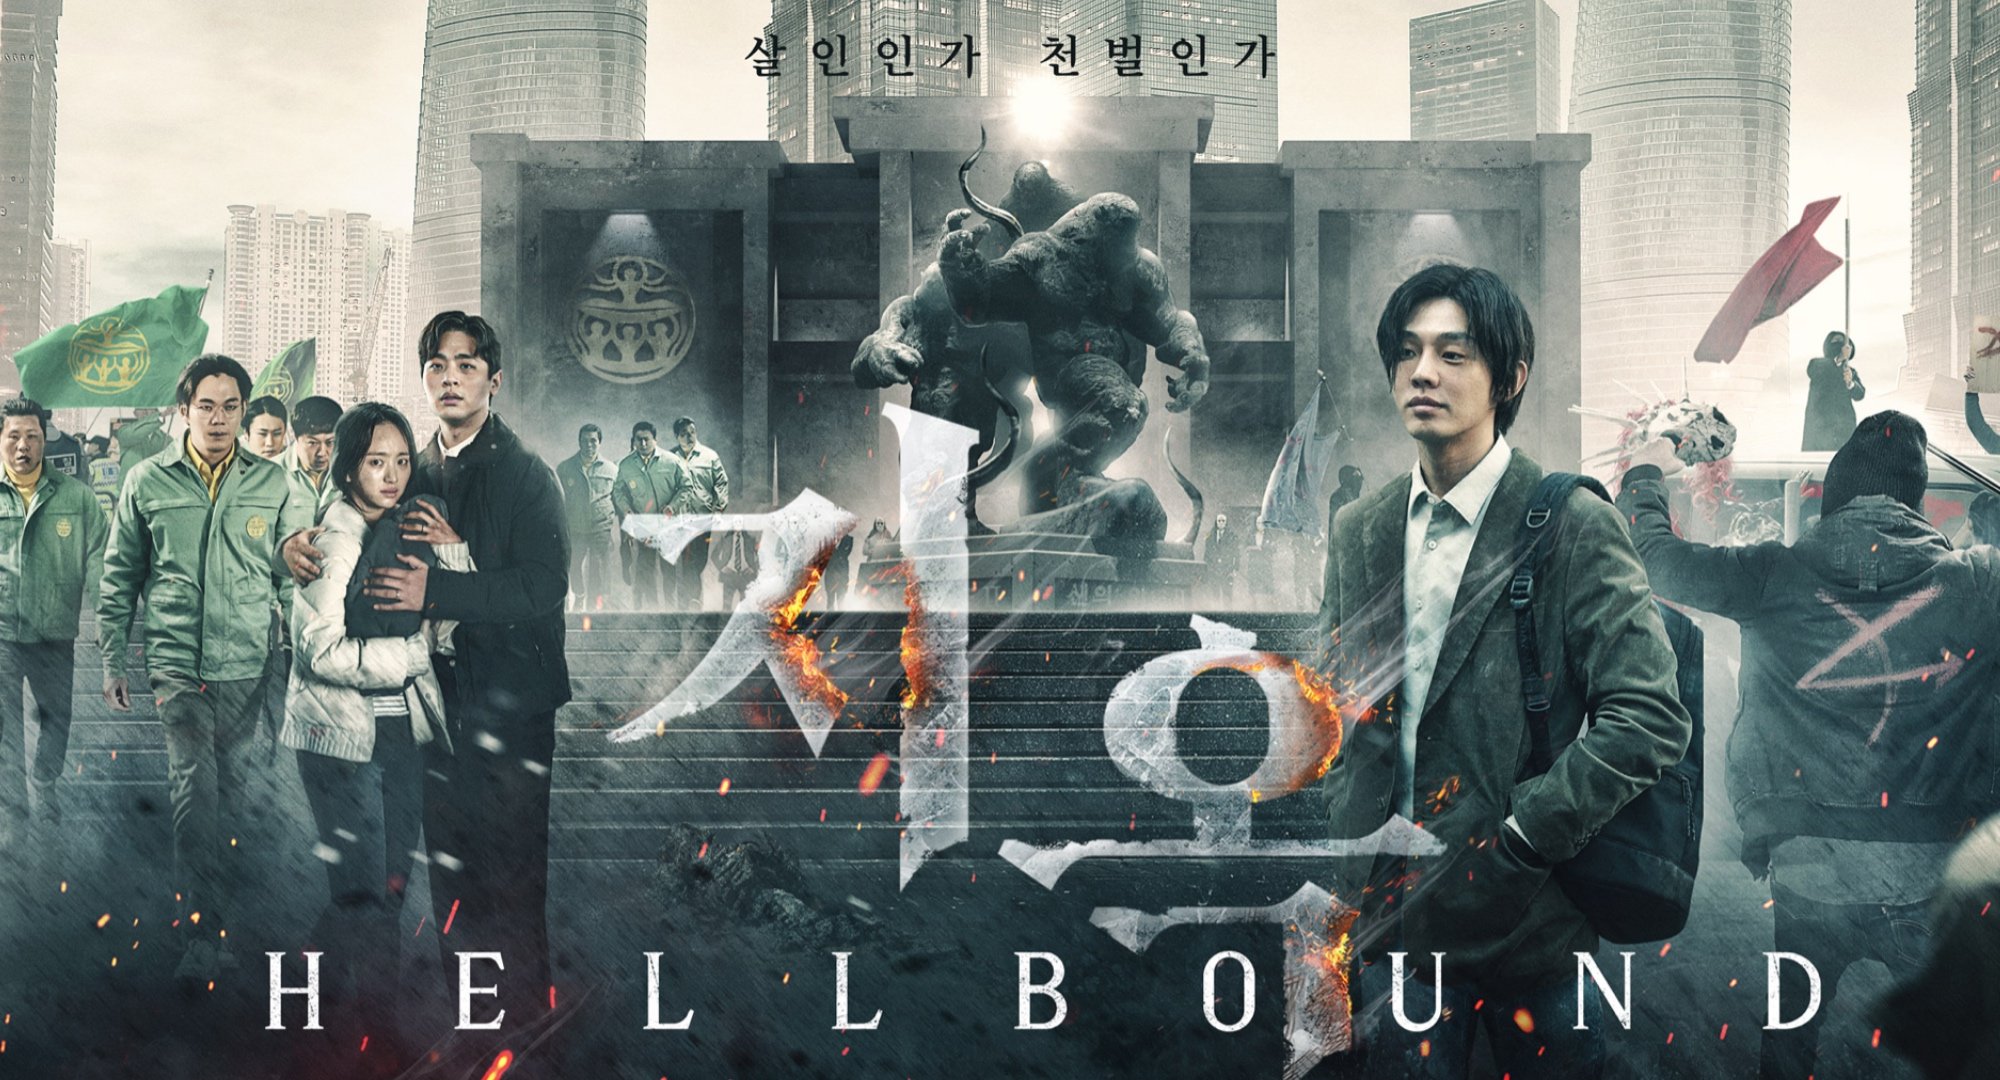 'Hellbound' Netflix official poster of main characters.